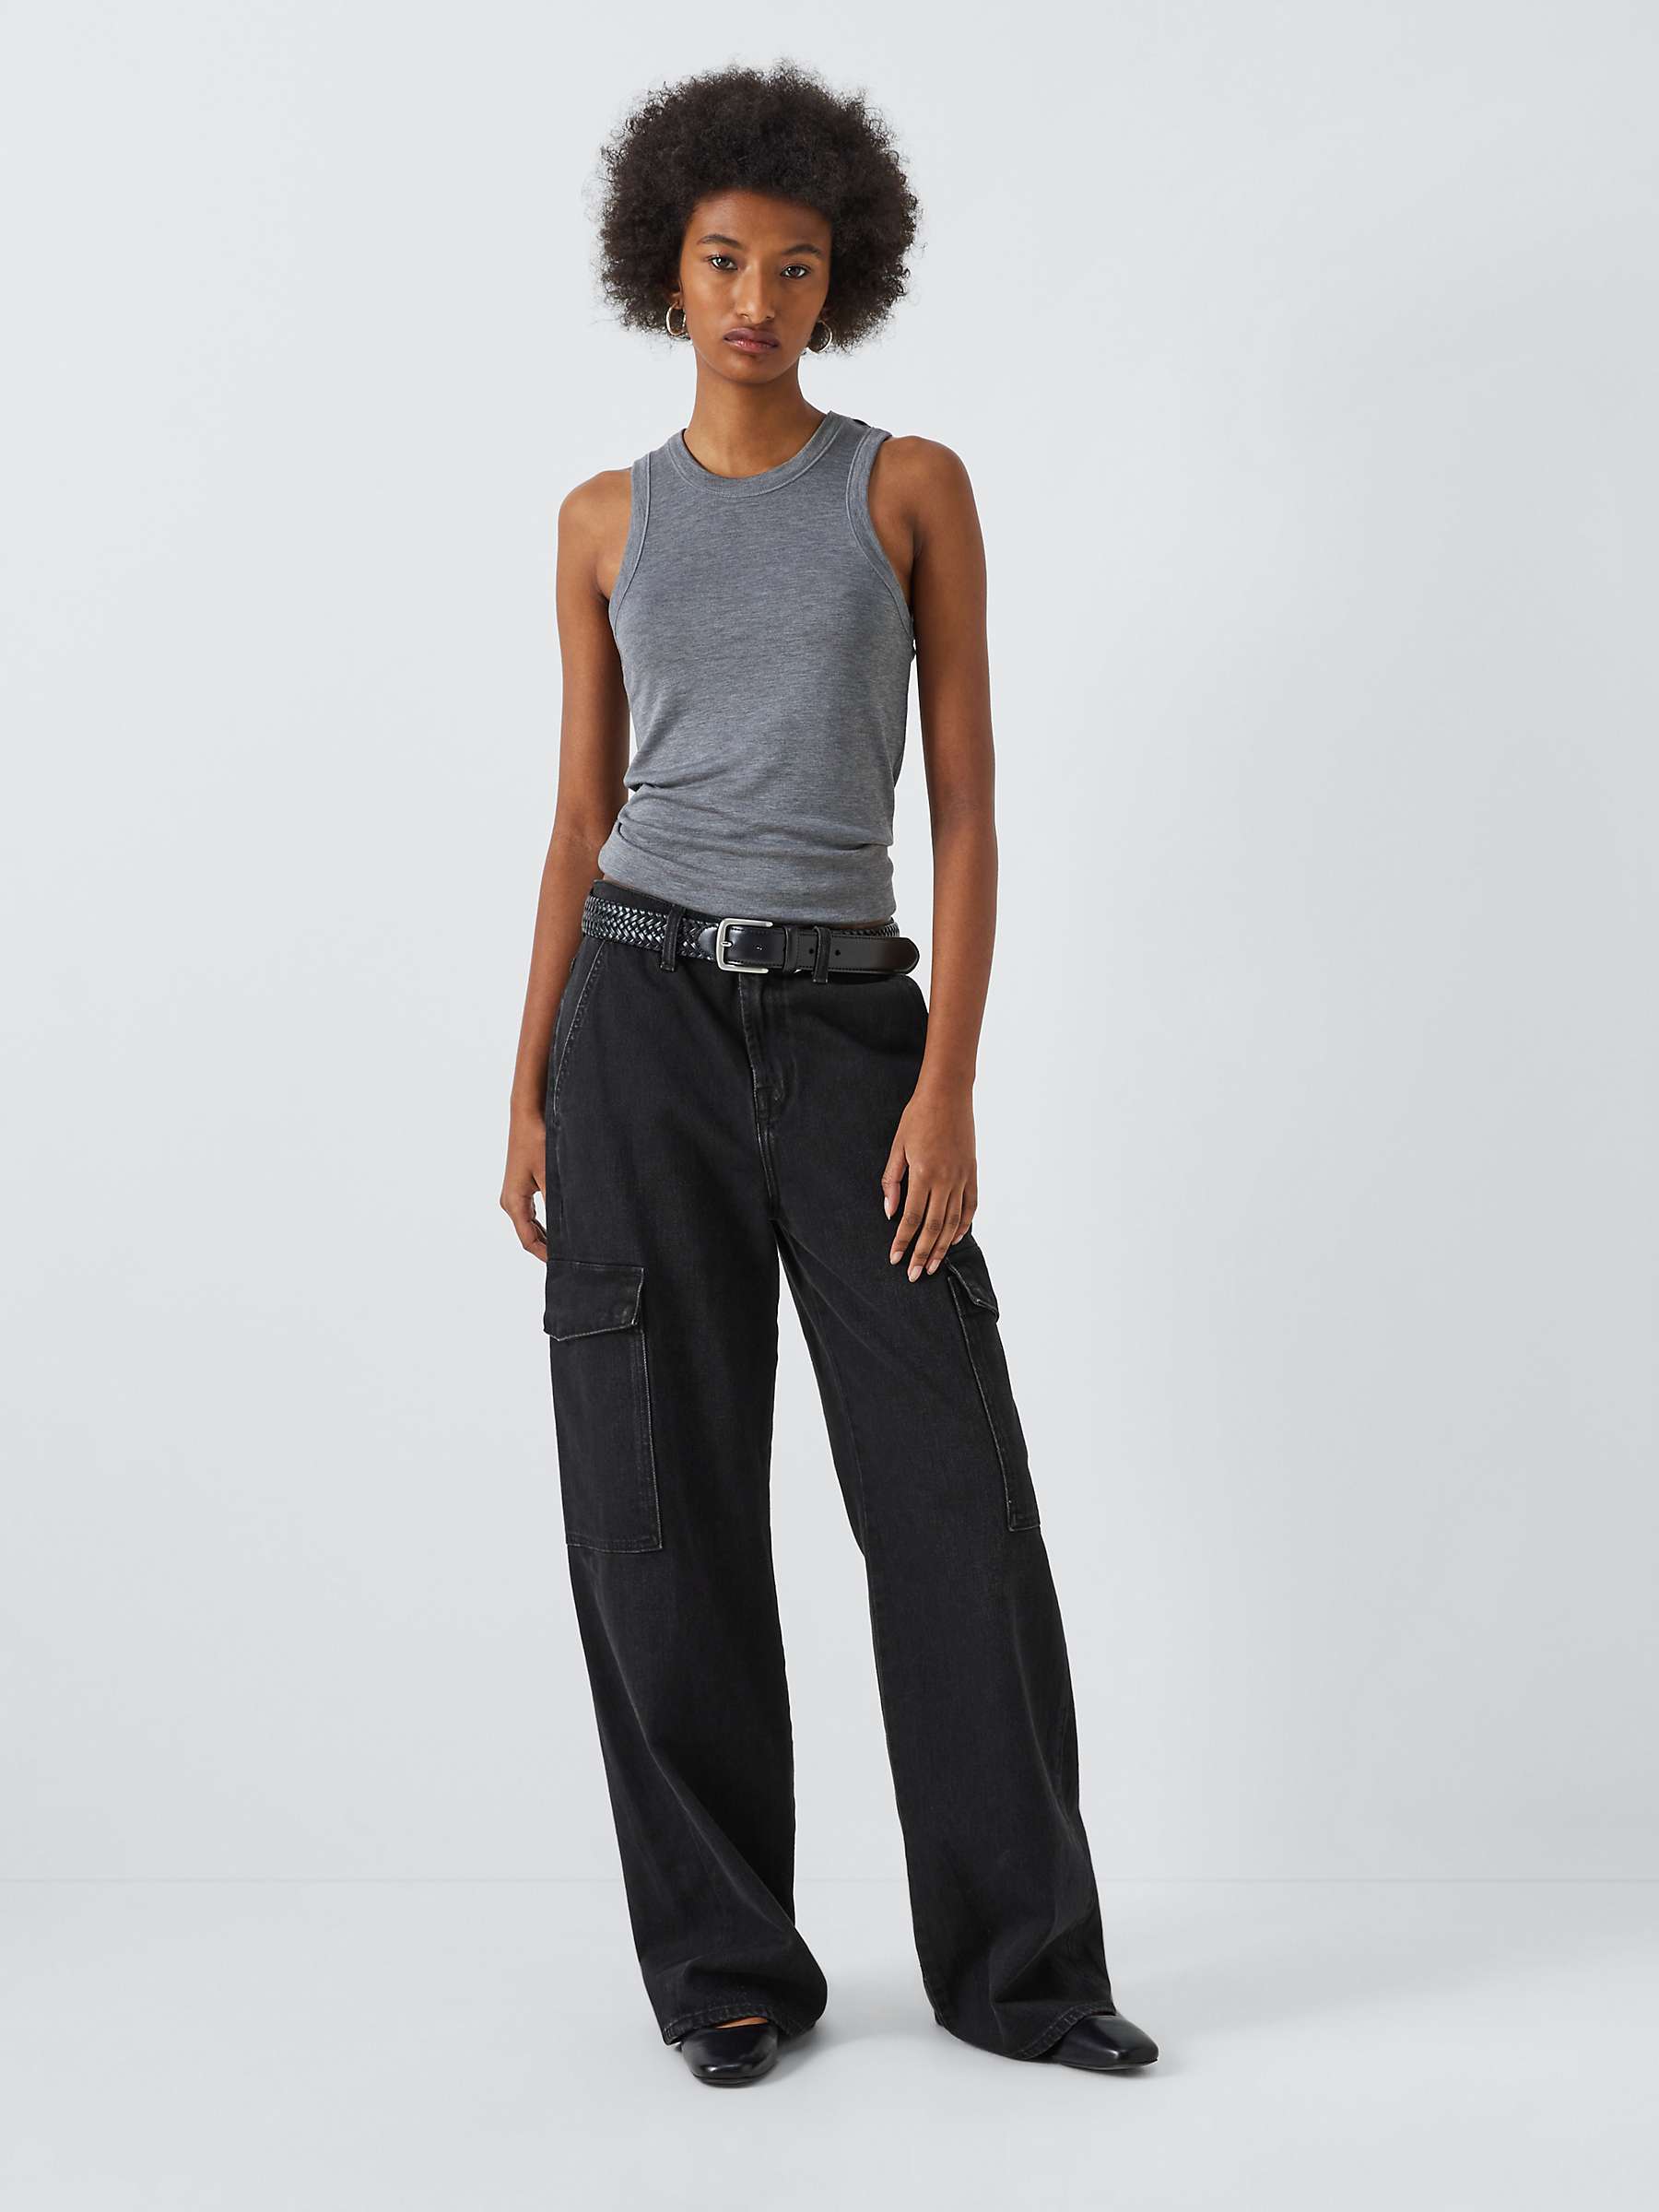 Buy 7 For All Mankind Cargo Scout Jeans, Global Online at johnlewis.com